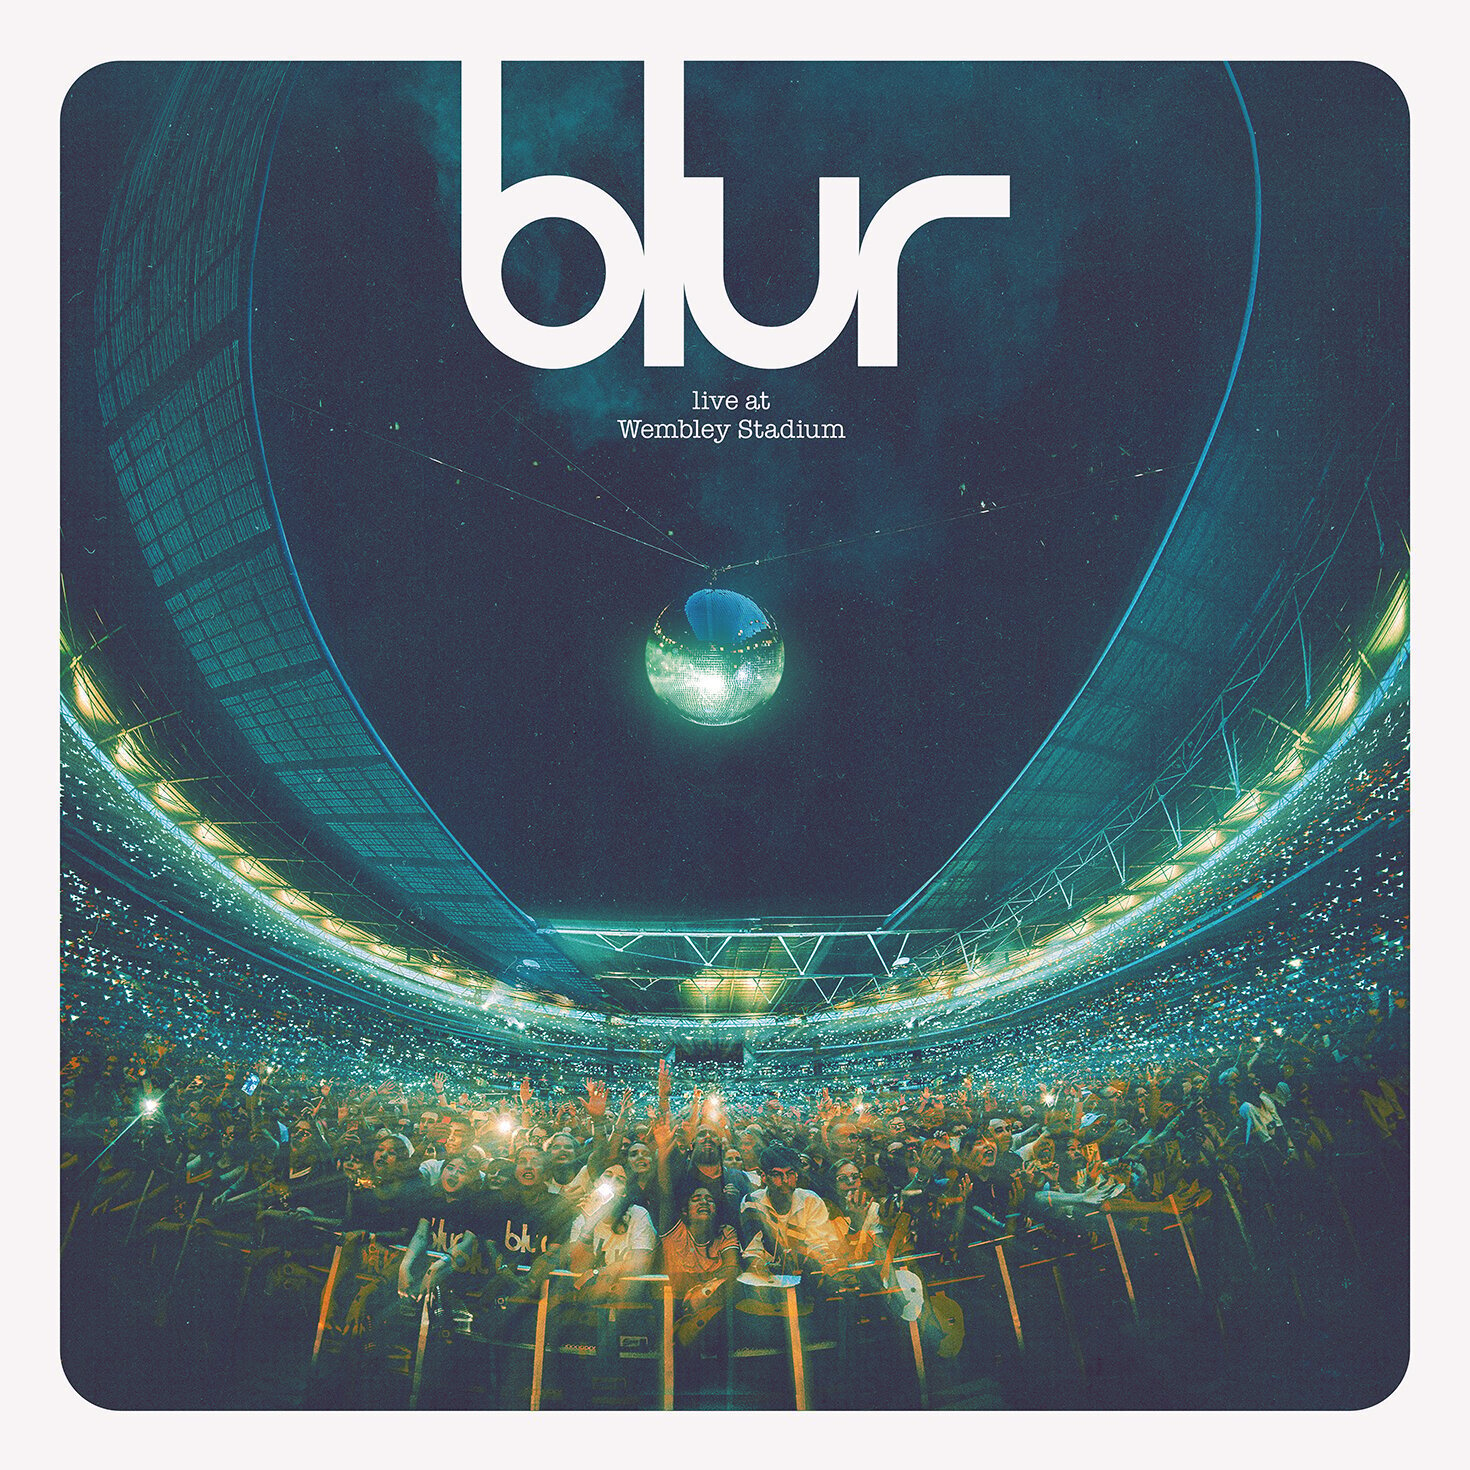 Disco in vinile Blur - Live At Wembley Stadium (Limited Edition ) (3 LP)